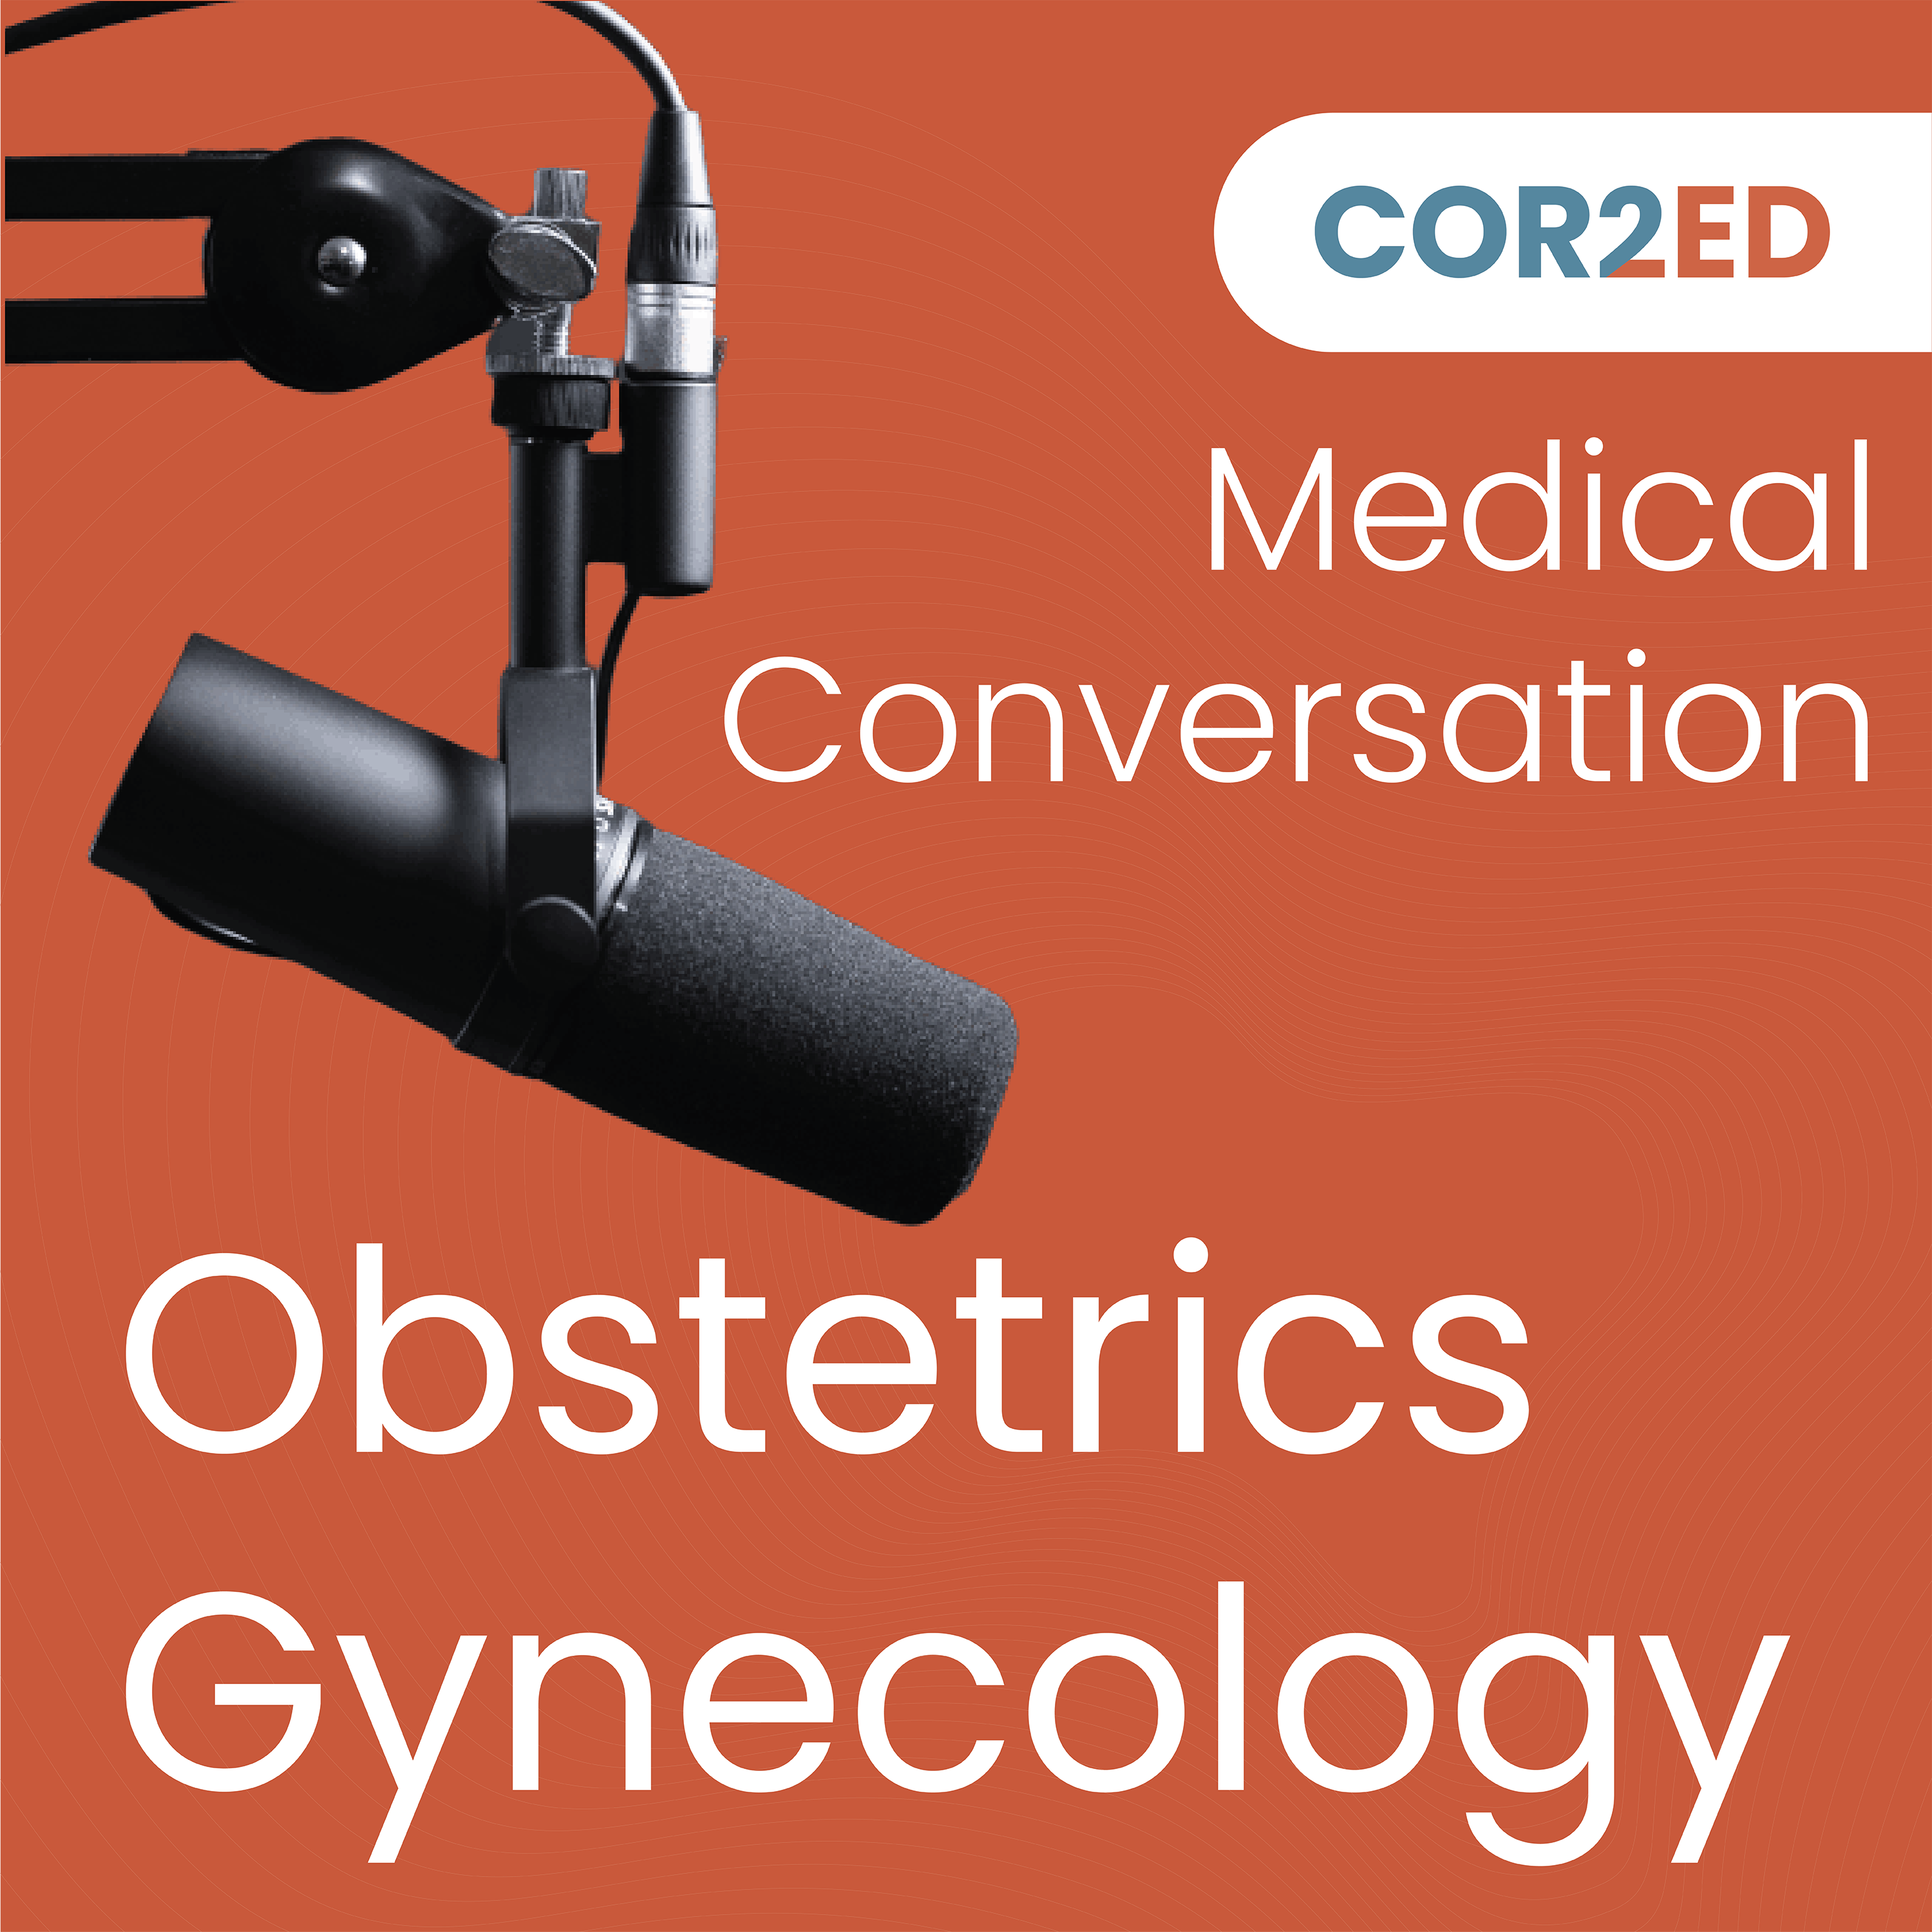 Bleeding disorders in women: Gynecological considerations